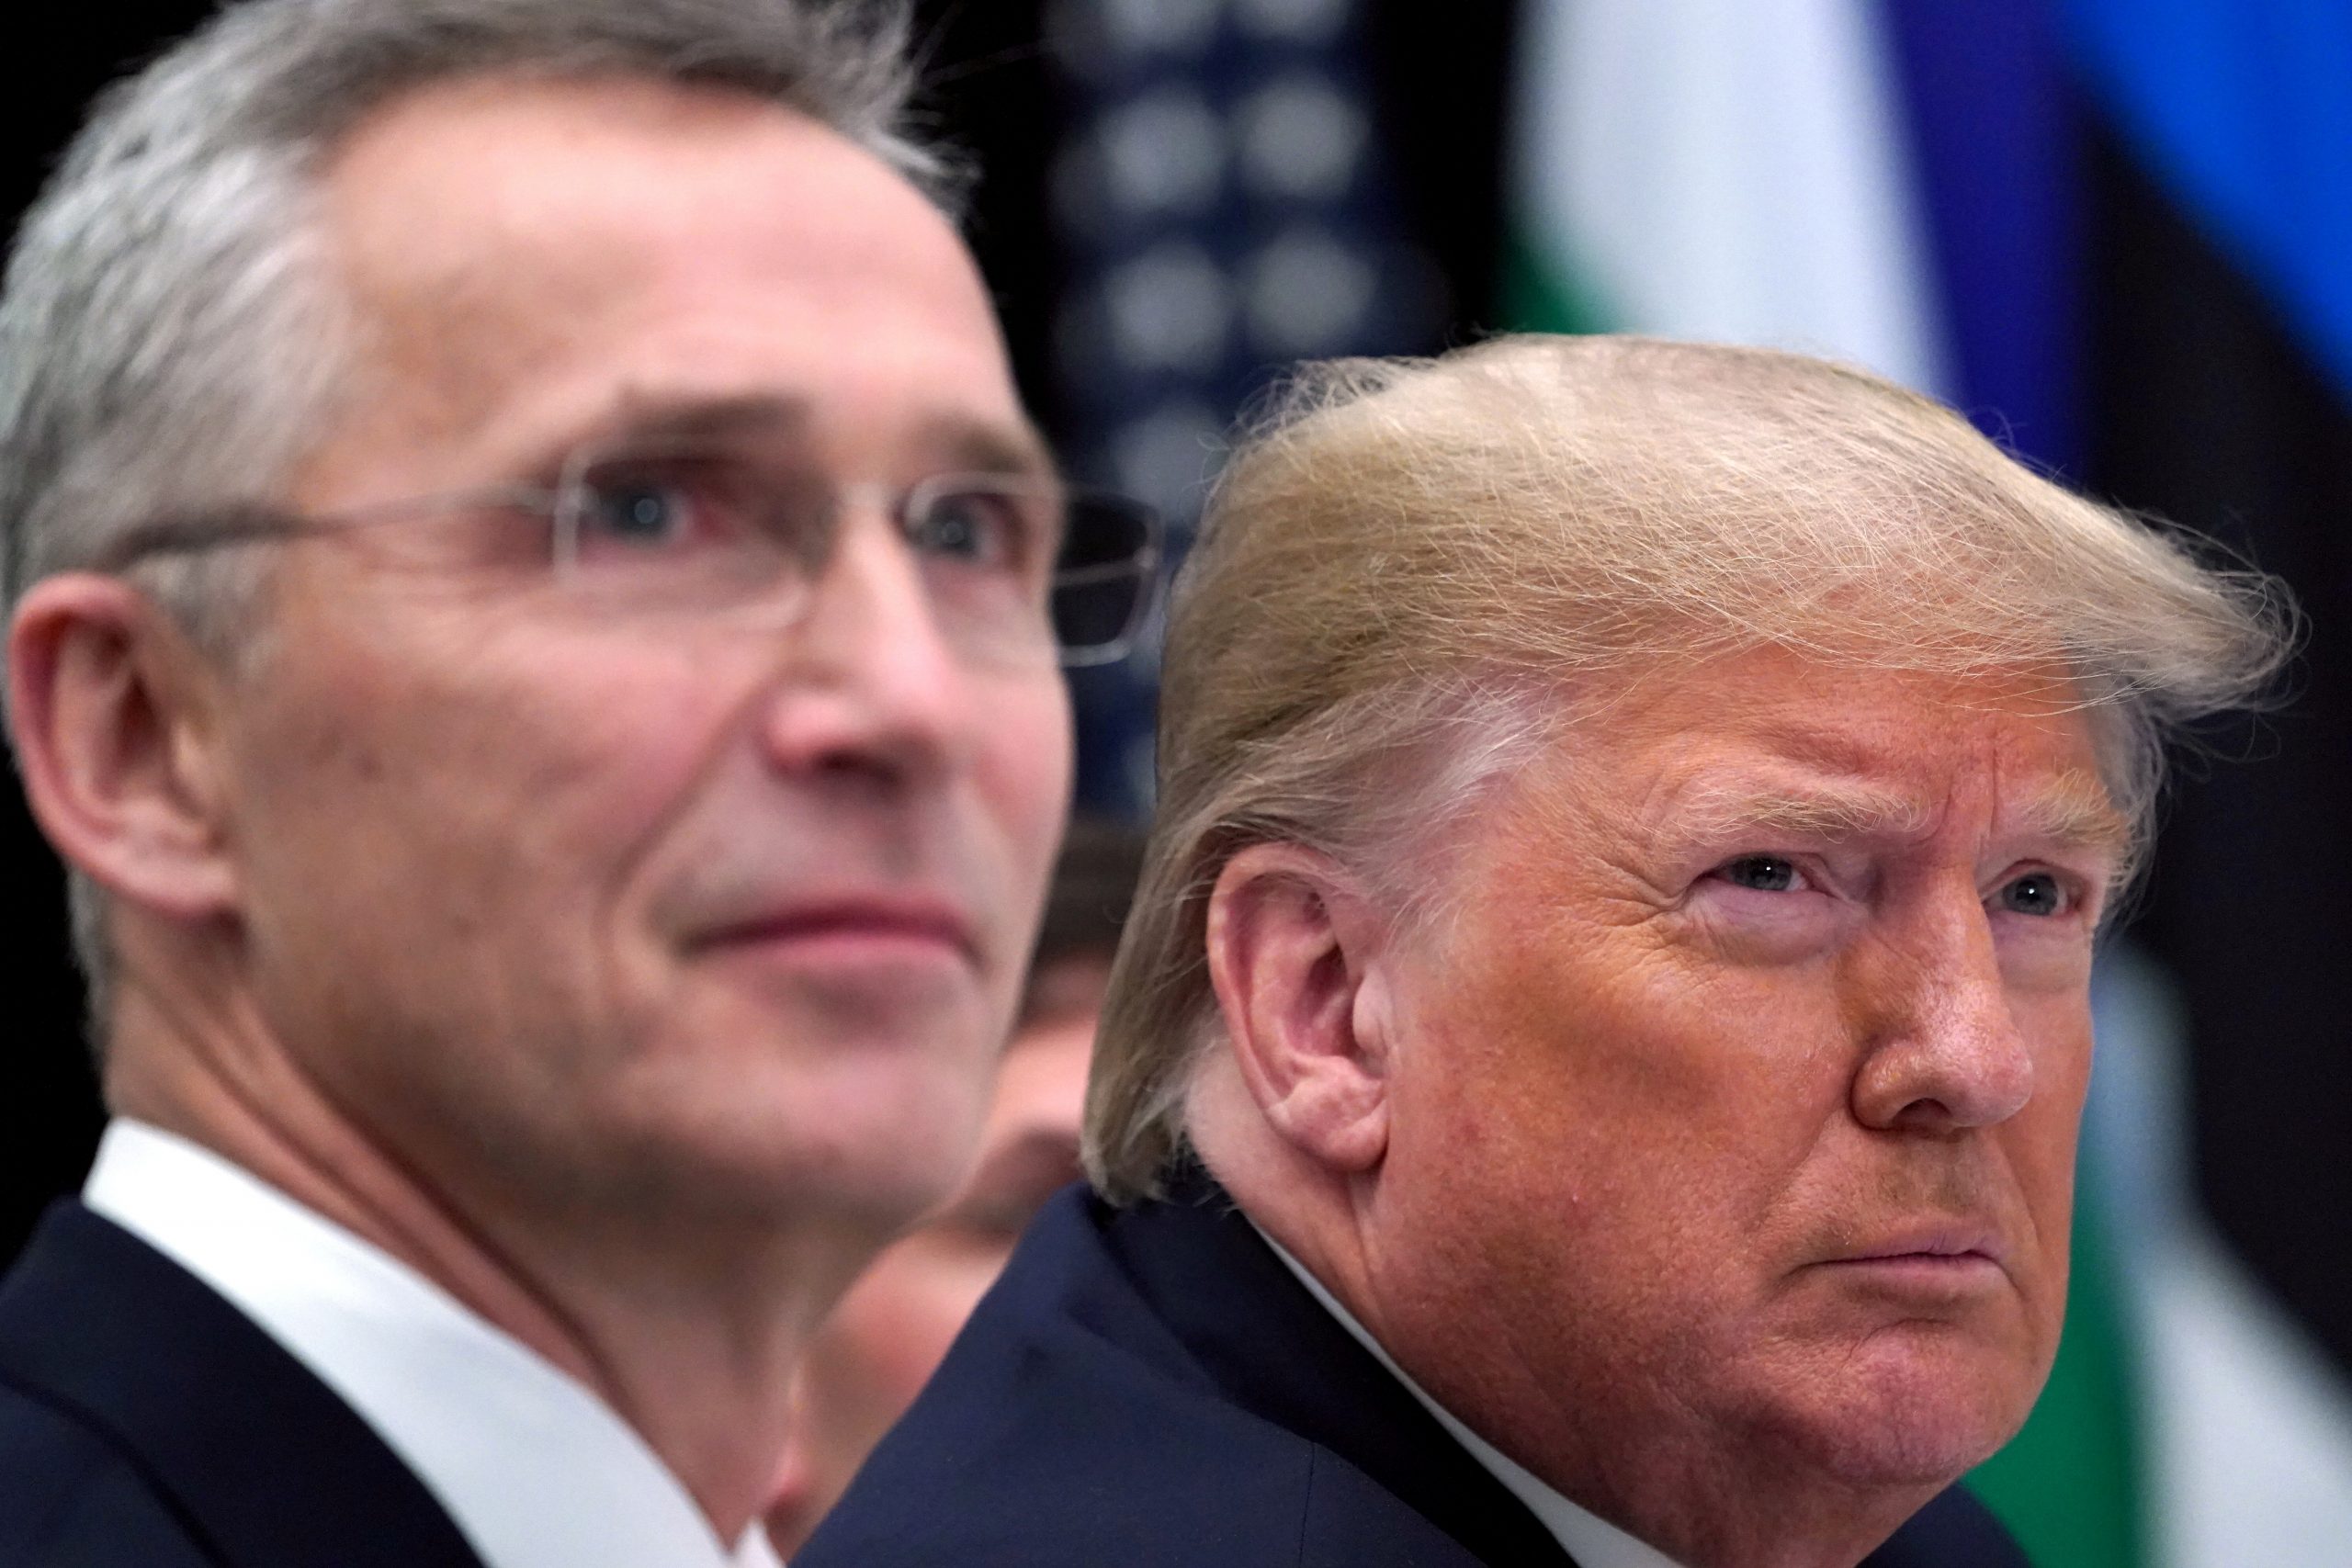 FILE PHOTO: NATO Alliance summit in Watford FILE PHOTO: U.S. President Donald Trump reacts next to NATO Secretary General Jens Stoltenberg as they attend a working lunch during the NATO leaders summit in Watford, Britain, December 4, 2019. REUTERS/Kevin Lamarque/File Photo Kevin Lamarque